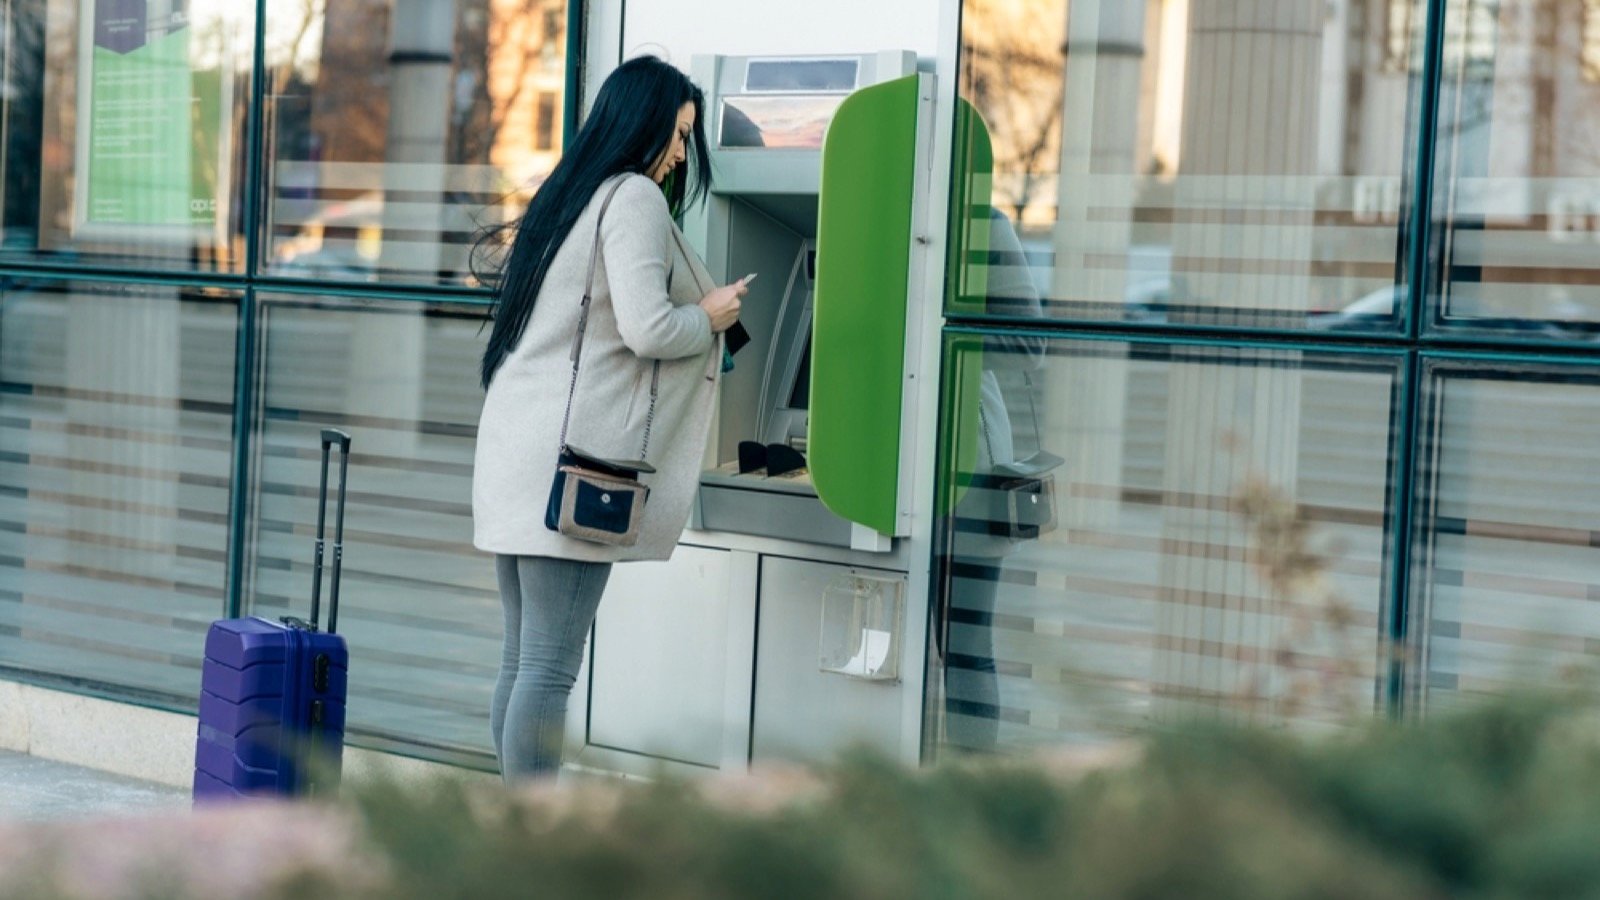 <p>“Clearly, you’ve never had ATM problems in a foreign country,” one user said, responding to the poster. “Nor have you been in a country that has widespread ATM/banking issues. You also have no idea how easy it is for an American bank to get any foreign currency with little notice.”</p>